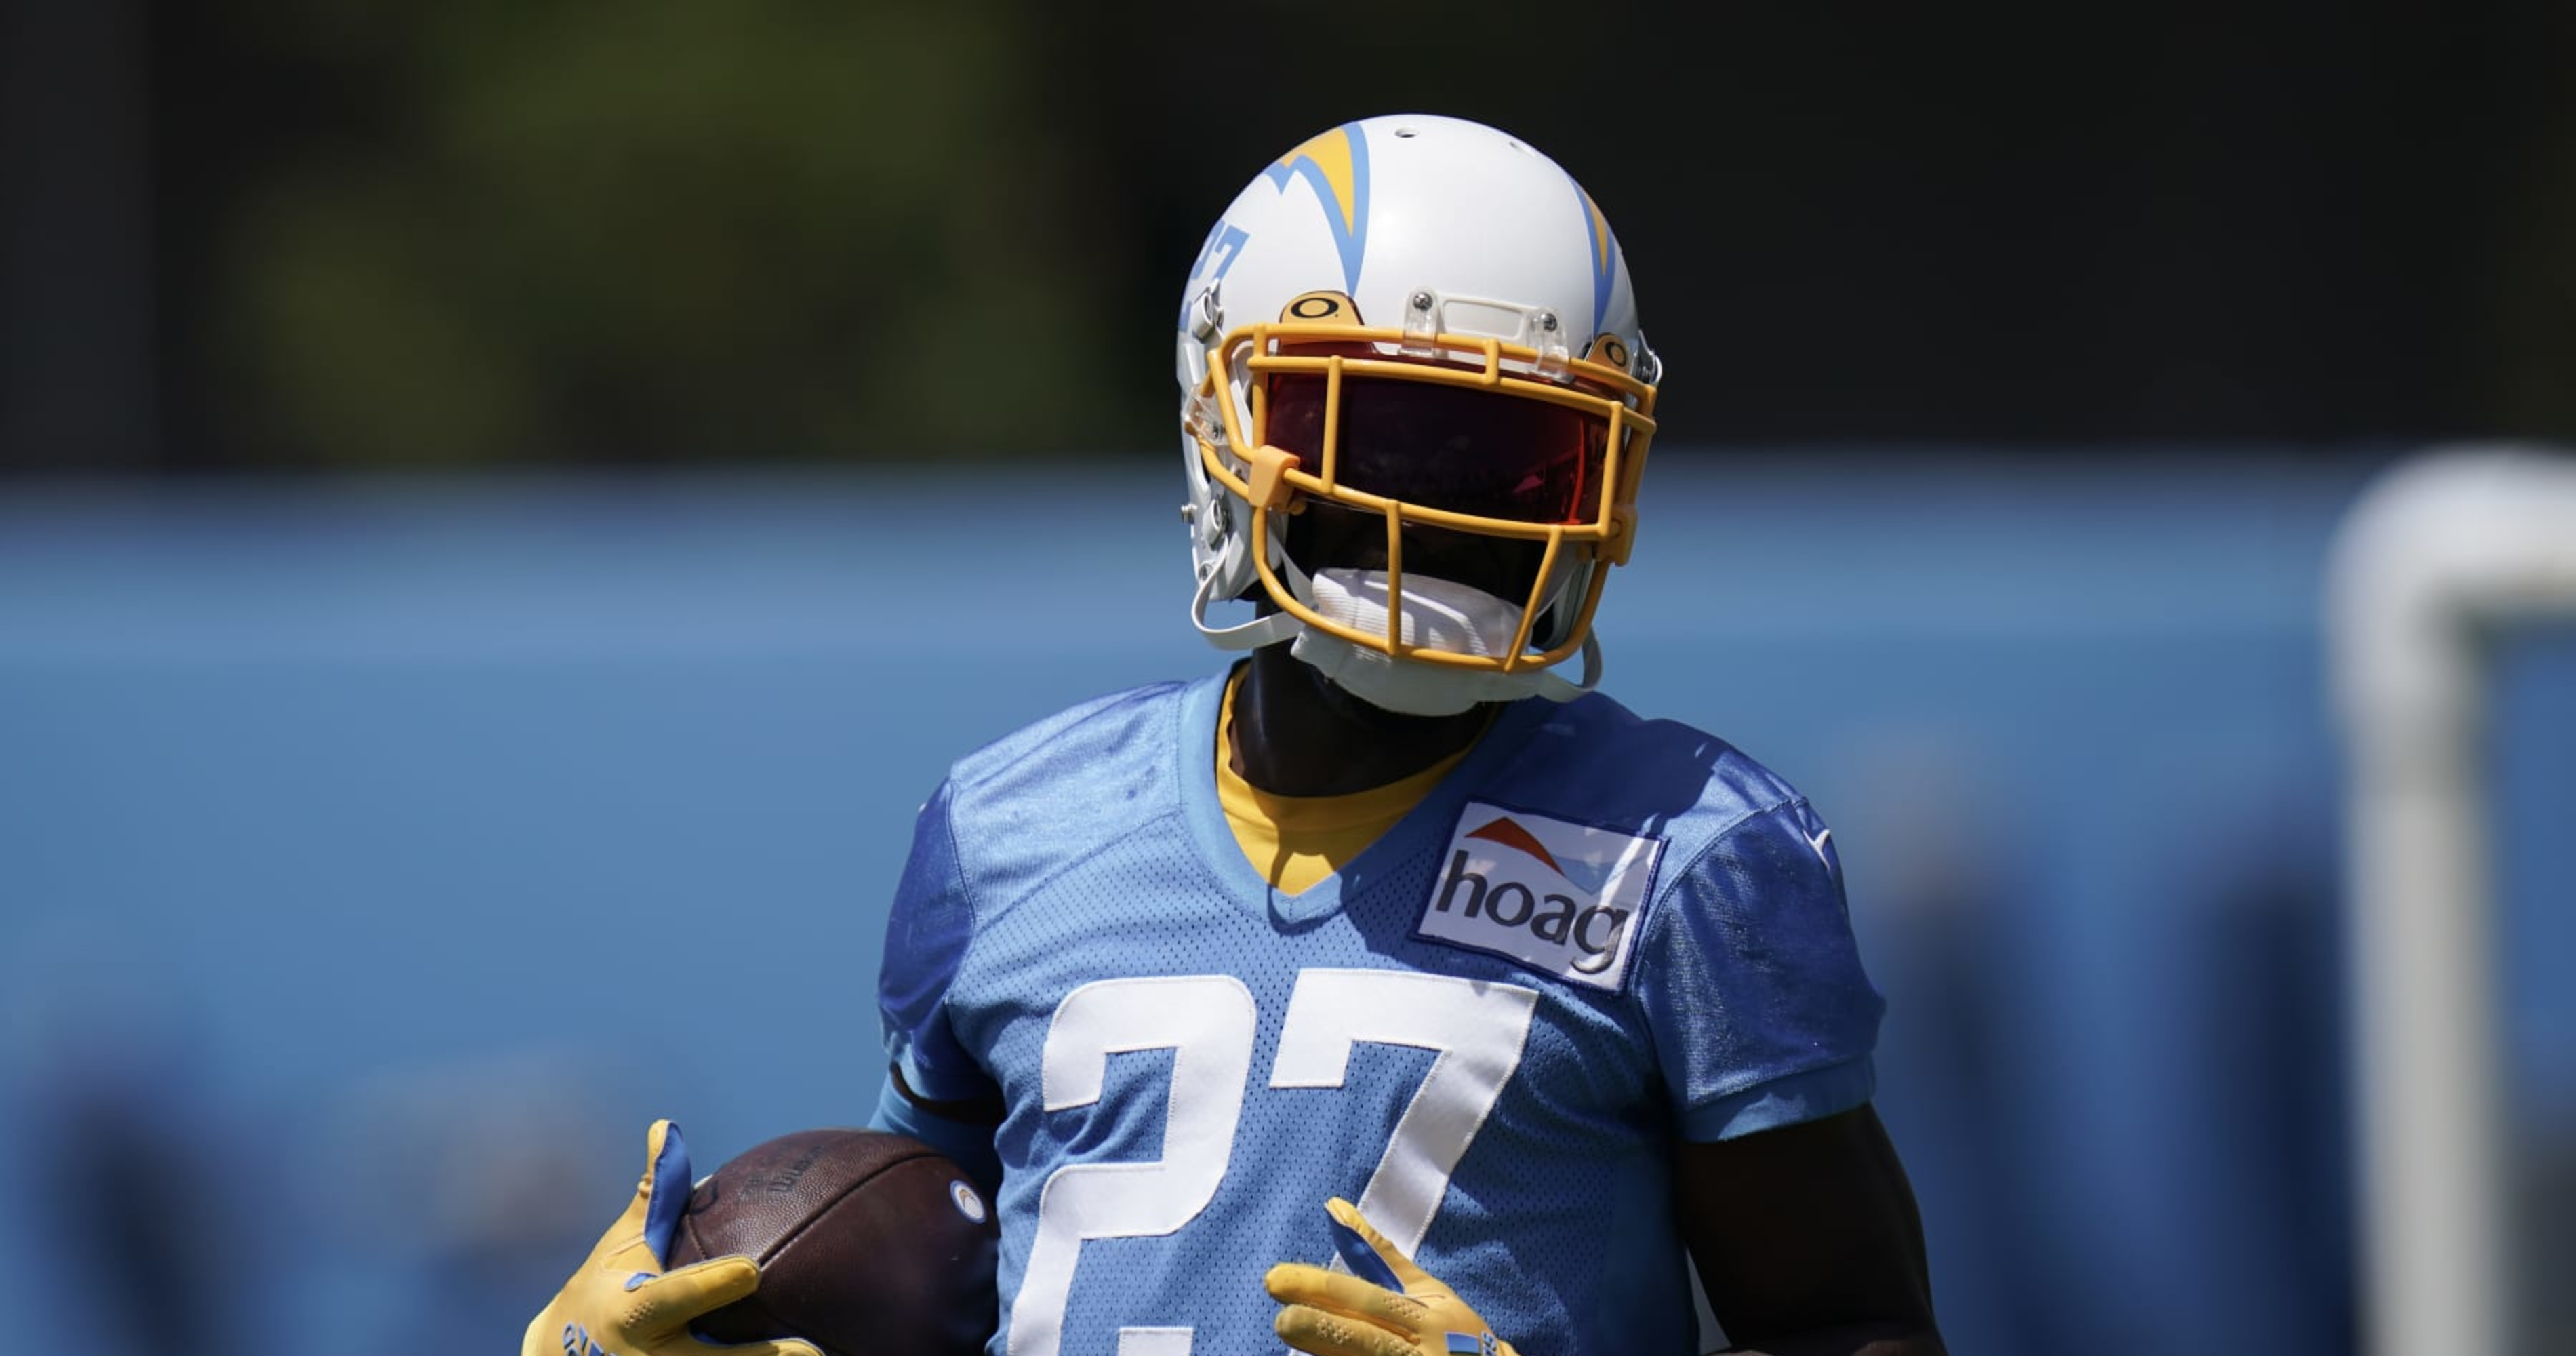 Chargers' J.C. Jackson to Miss Remainder of Season with Knee Injury